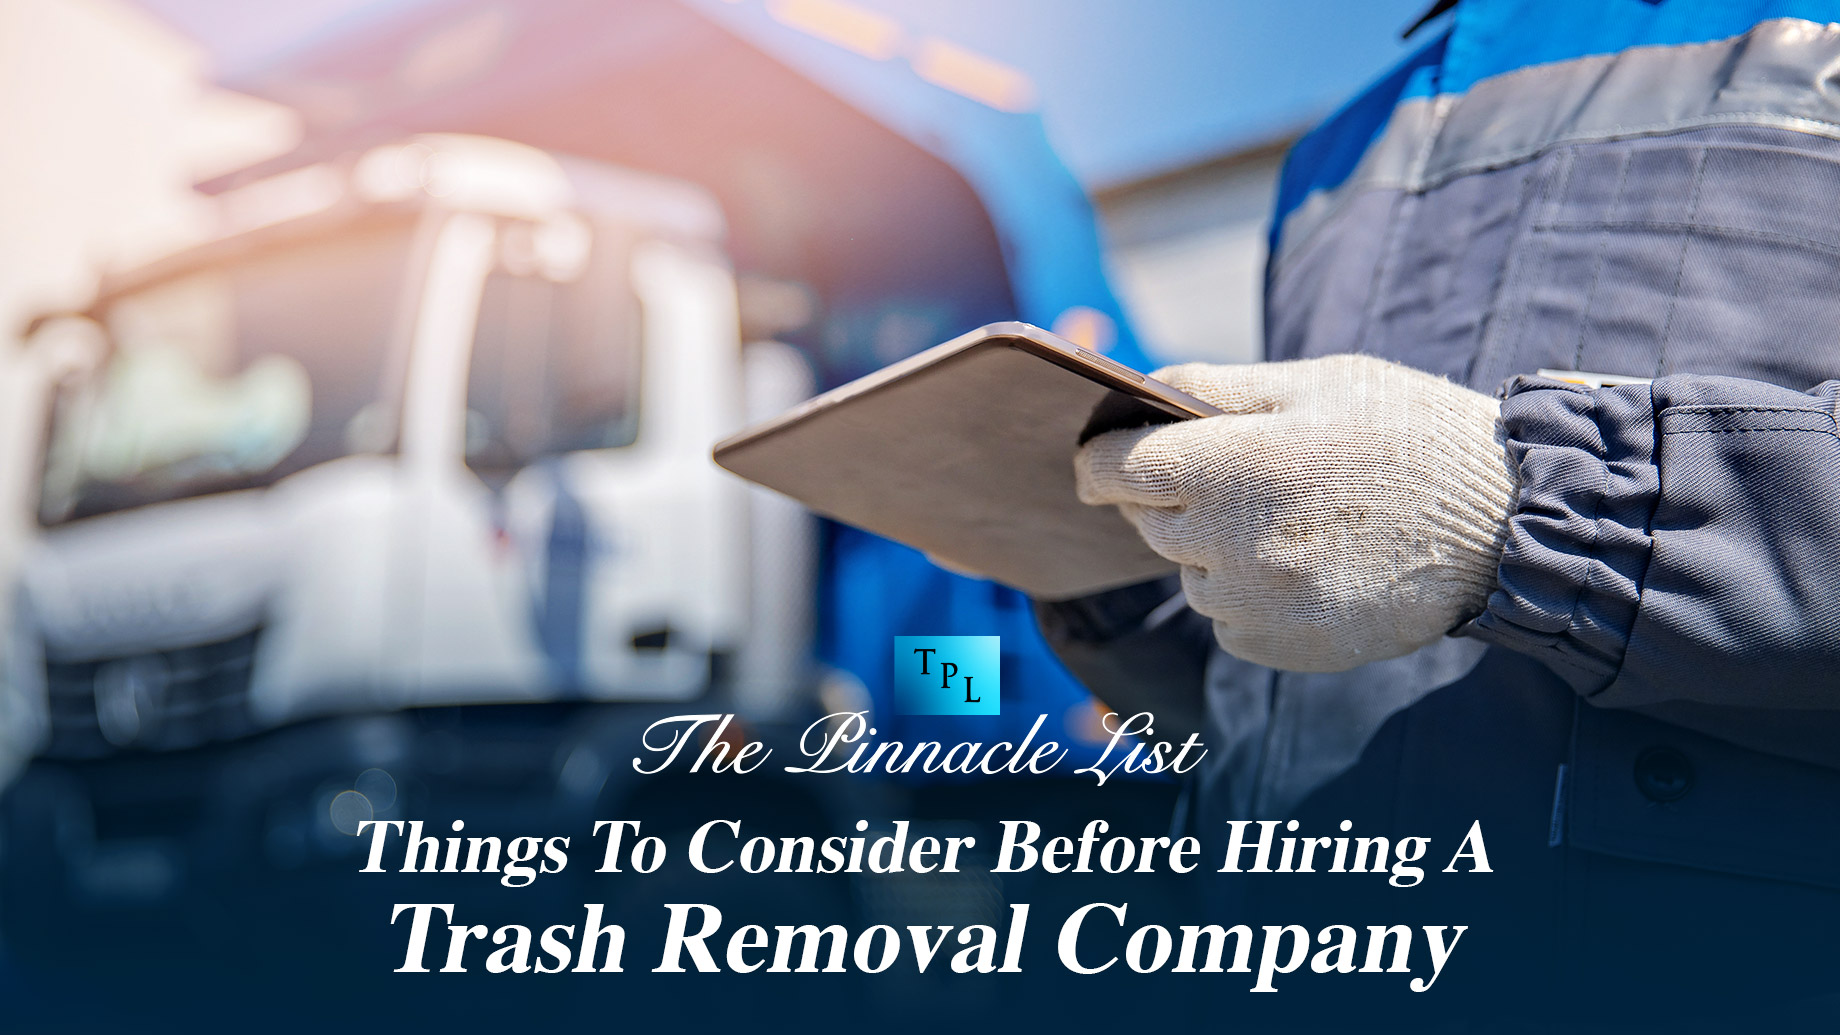 Things To Consider Before Hiring A Trash Removal Company